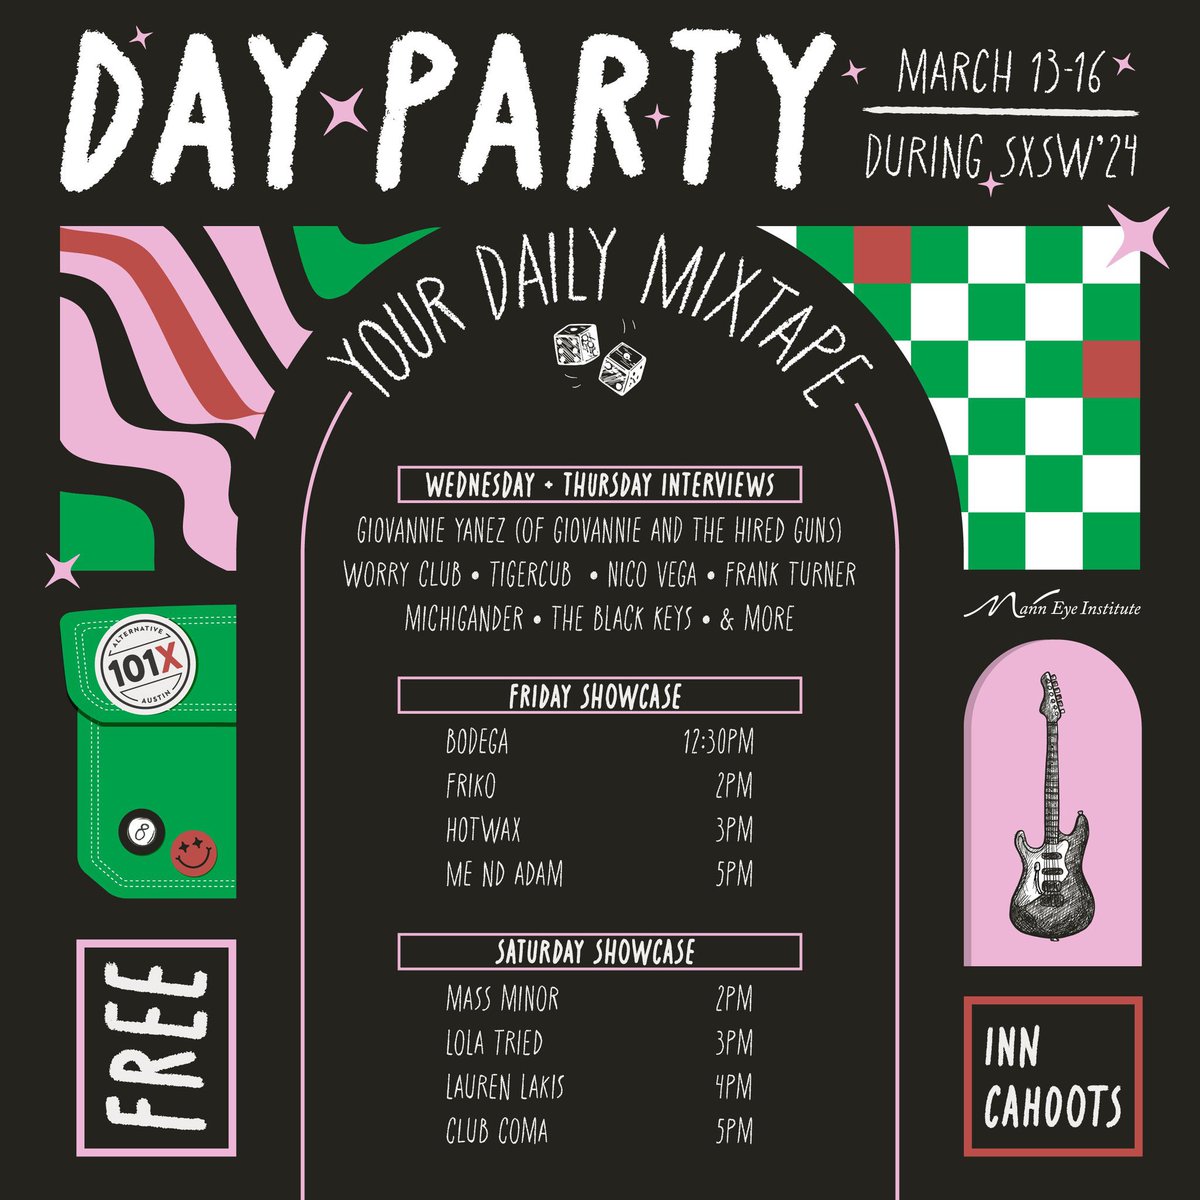 The @101x Day Party lineup has arrived! Expect performances from: BODEGA, Friko, HotWax, Me Nd Adam, Mass Minor, Lola Tried, Lauren Lakis, and Club Coma! All are welcome. Free. No Badge required. 🗓 Wed. 3/13 - Sat. 3/16  📍 Inn Cahoots (1221 E 6th St) #SXSW